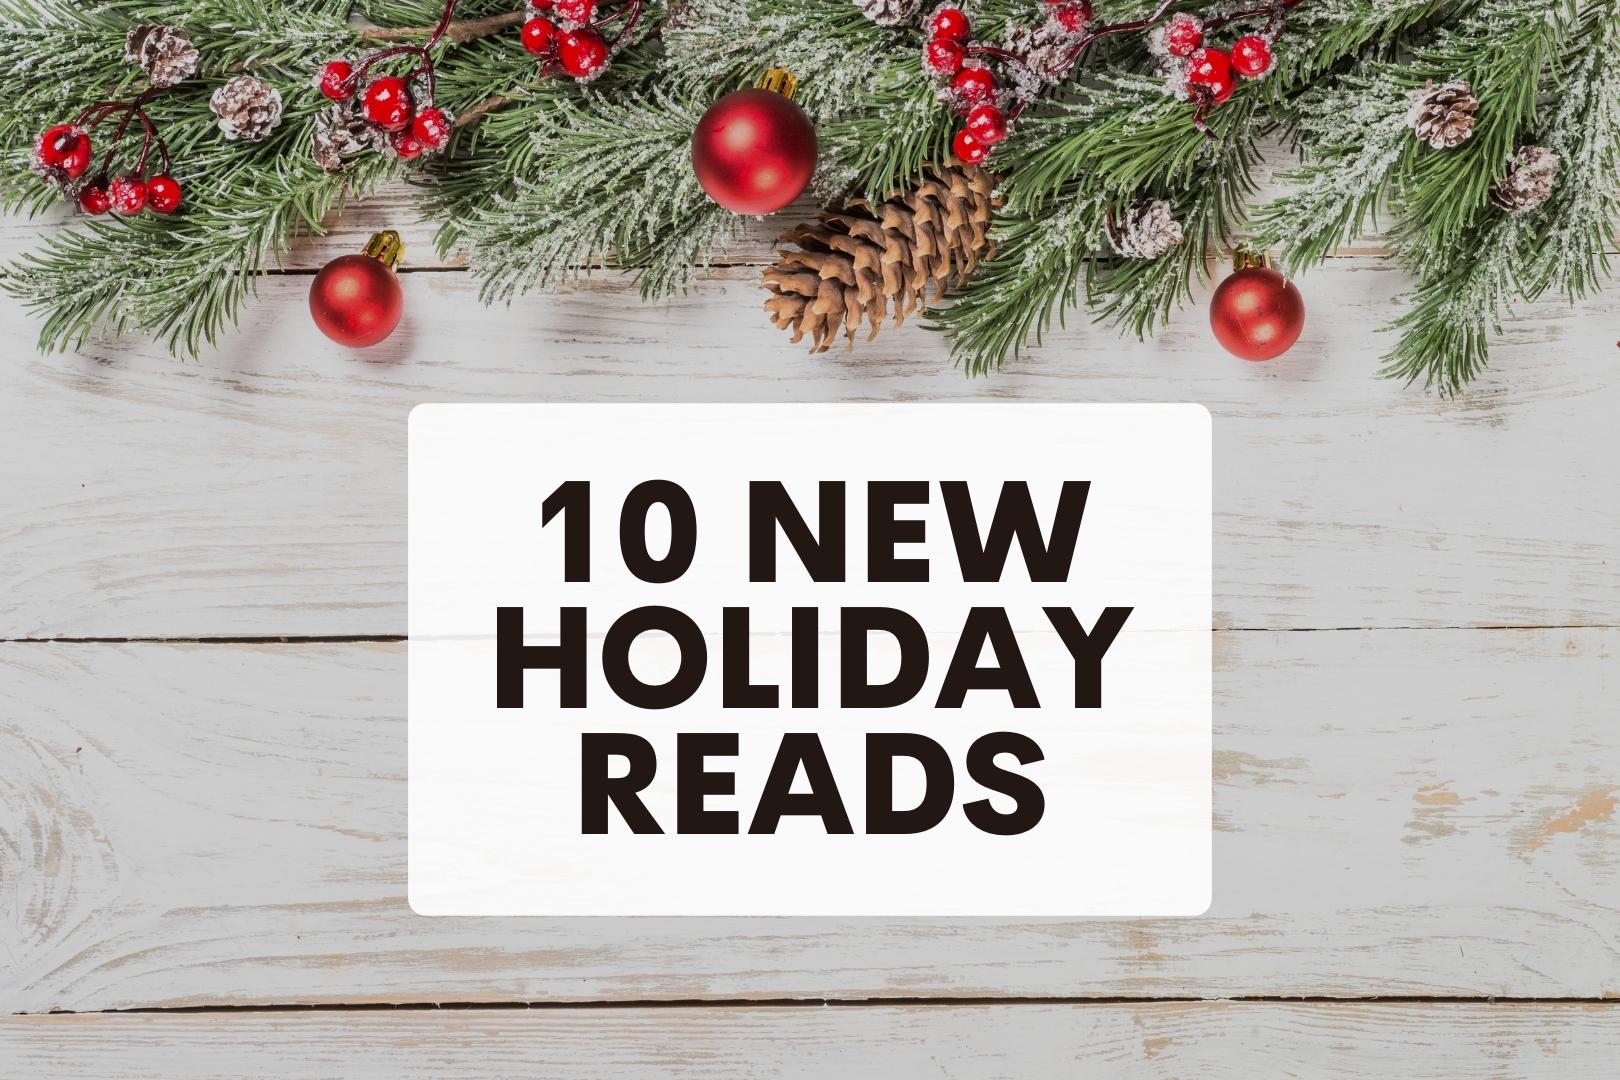 10 New Holiday Books to Read in 2023